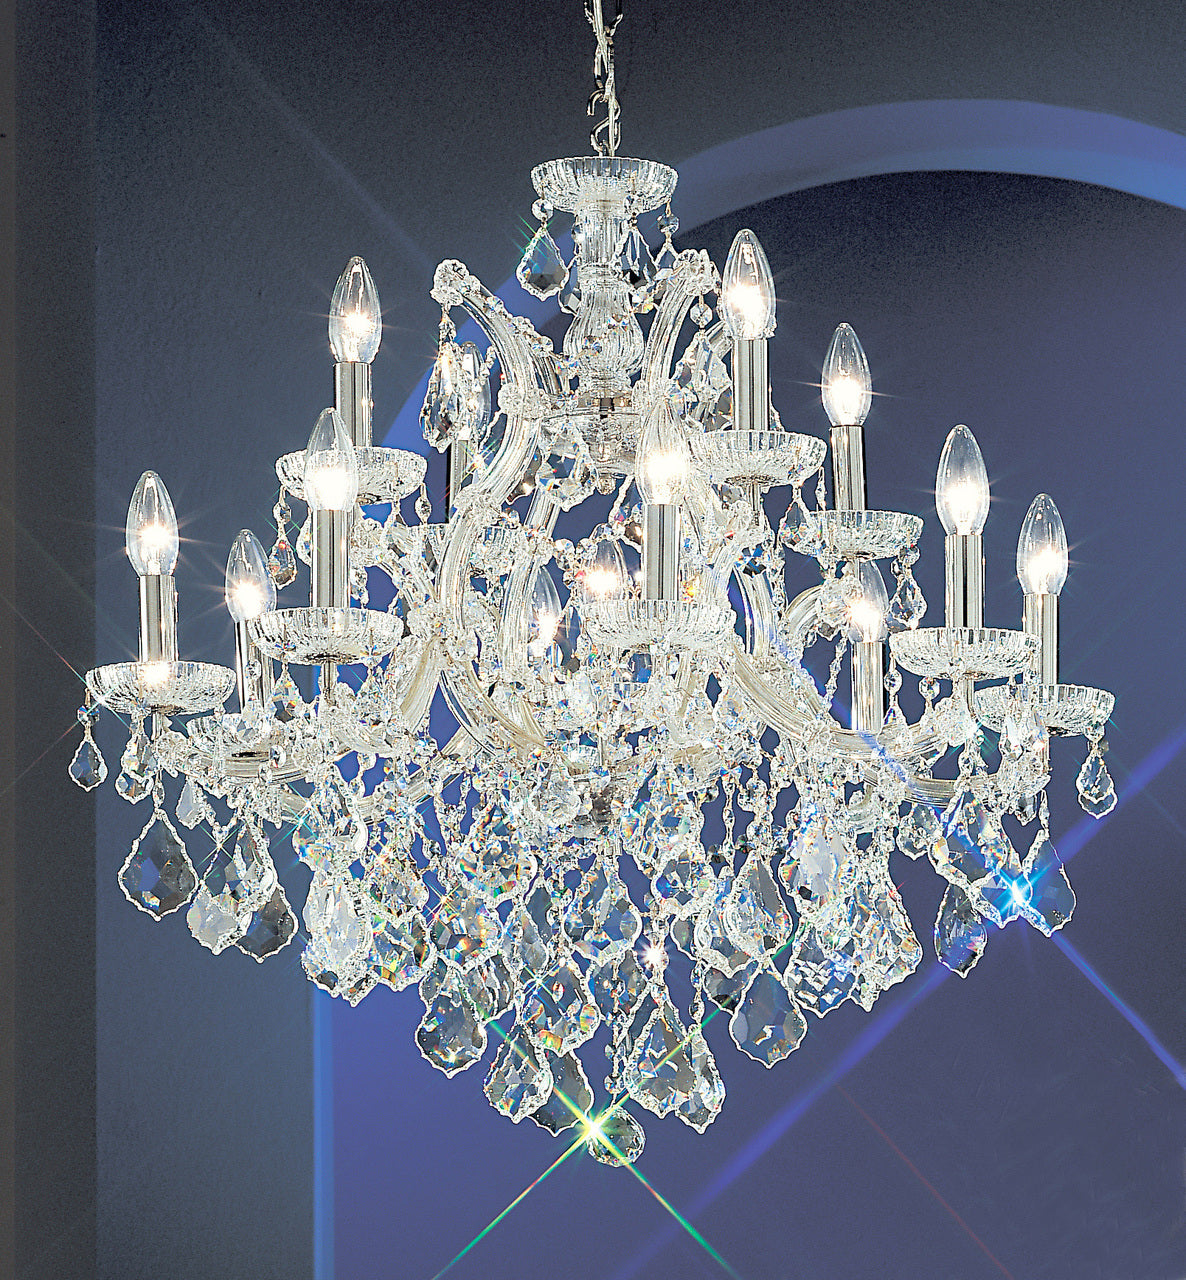 Classic Lighting 8133 CH S Maria Theresa Traditional Crystal Chandelier in Chrome (Imported from Italy)